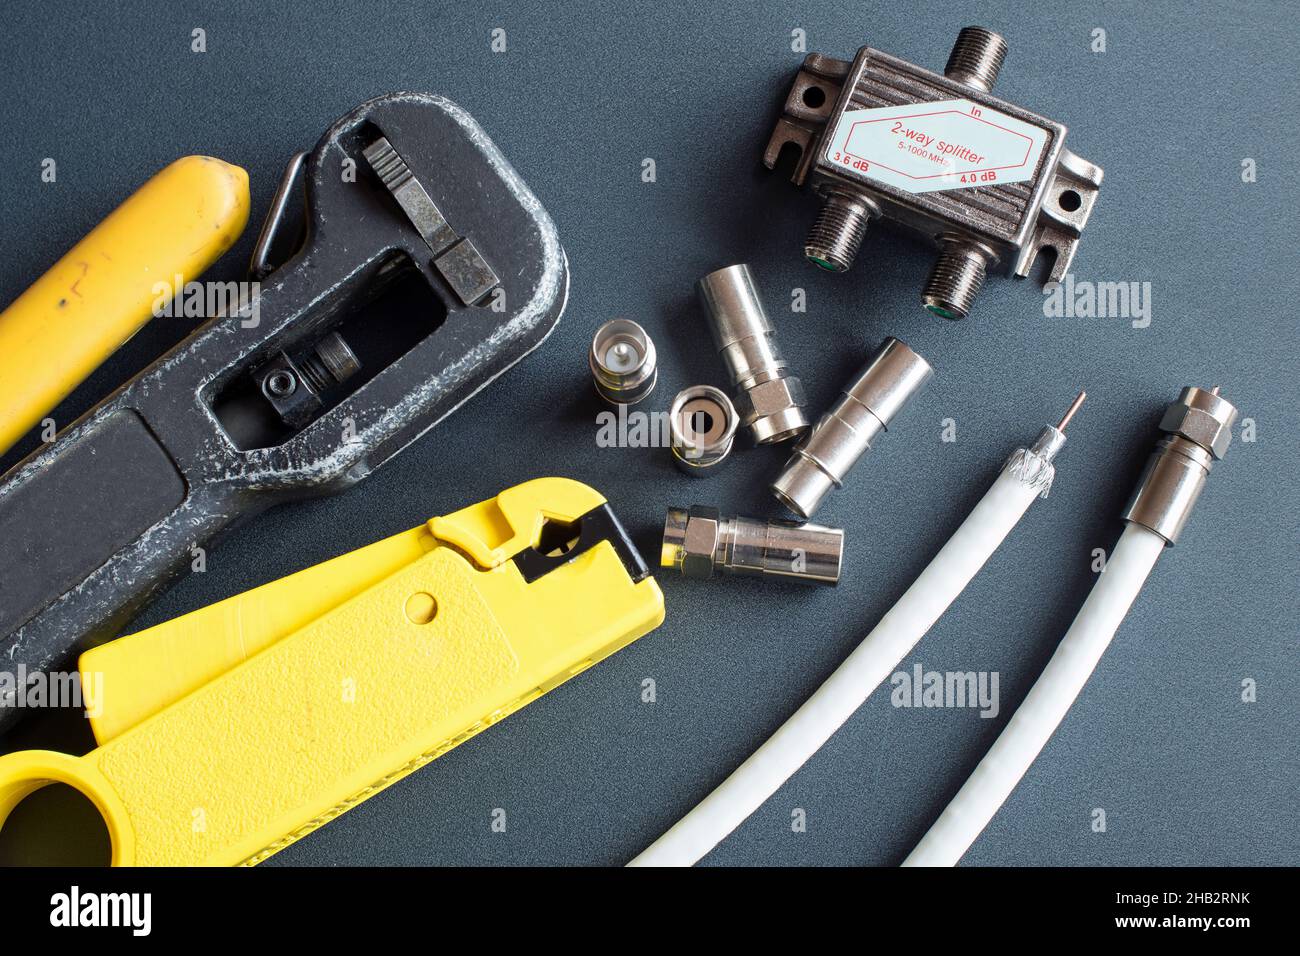 Tools for mounting TV connectors Stock Photo